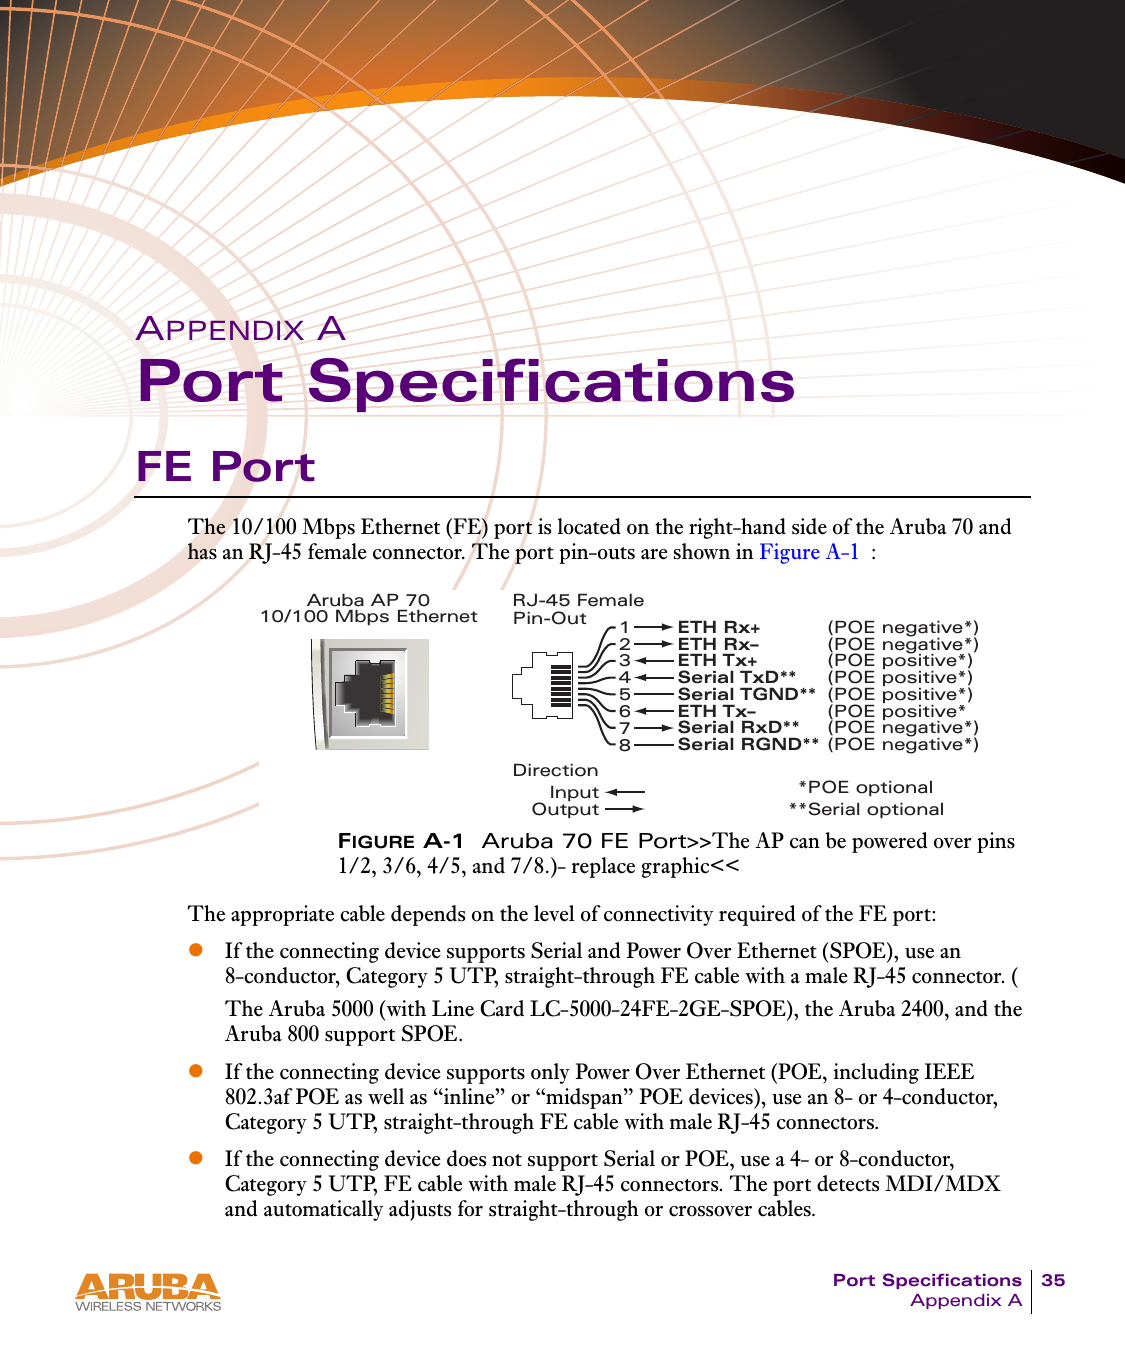 Port Specifications 35Appendix AAPPENDIX APort SpecificationsFE PortThe 10/100 Mbps Ethernet (FE) port is located on the right-hand side of the Aruba 70 and has an RJ-45 female connector. The port pin-outs are shown in Figure A-1 :FIGURE A-1 Aruba 70 FE Port&gt;&gt;The AP can be powered over pins 1/2, 3/6, 4/5, and 7/8.)- replace graphic&lt;&lt;The appropriate cable depends on the level of connectivity required of the FE port:zIf the connecting device supports Serial and Power Over Ethernet (SPOE), use an 8-conductor, Category 5 UTP, straight-through FE cable with a male RJ-45 connector. (The Aruba 5000 (with Line Card LC-5000-24FE-2GE-SPOE), the Aruba 2400, and the Aruba 800 support SPOE.zIf the connecting device supports only Power Over Ethernet (POE, including IEEE 802.3af POE as well as “inline” or “midspan” POE devices), use an 8- or 4-conductor, Category 5 UTP, straight-through FE cable with male RJ-45 connectors. zIf the connecting device does not support Serial or POE, use a 4- or 8-conductor, Category 5 UTP, FE cable with male RJ-45 connectors. The port detects MDI/MDX and automatically adjusts for straight-through or crossover cables.Aruba AP 7010/100 Mbps EthernetRJ-45 FemalePin-Out*POE optional**Serial optionalSerial TxD**    (POE positive*)Serial TGND**  (POE positive*) Serial RxD**   (POE negative*)Serial RGND** (POE negative*)12345678ETH Rx+  (POE negative*)ETH Rx–  (POE negative*)ETH Tx+  (POE positive*)ETH Tx–    (POE positive*     DirectionInputOutput 